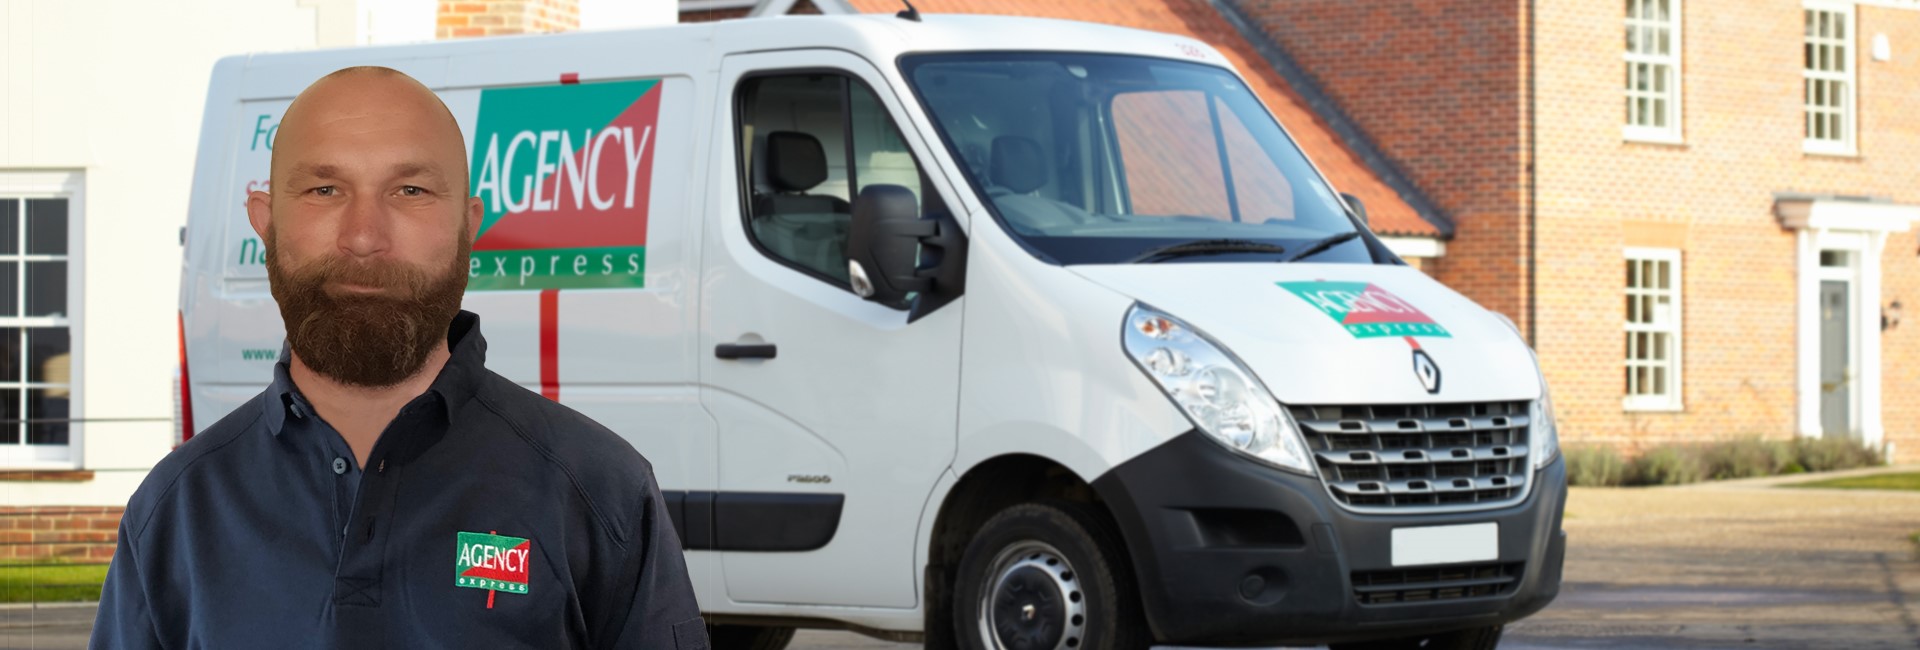 Agency Express franchise case study. Franchisee Paul Dymond with van.